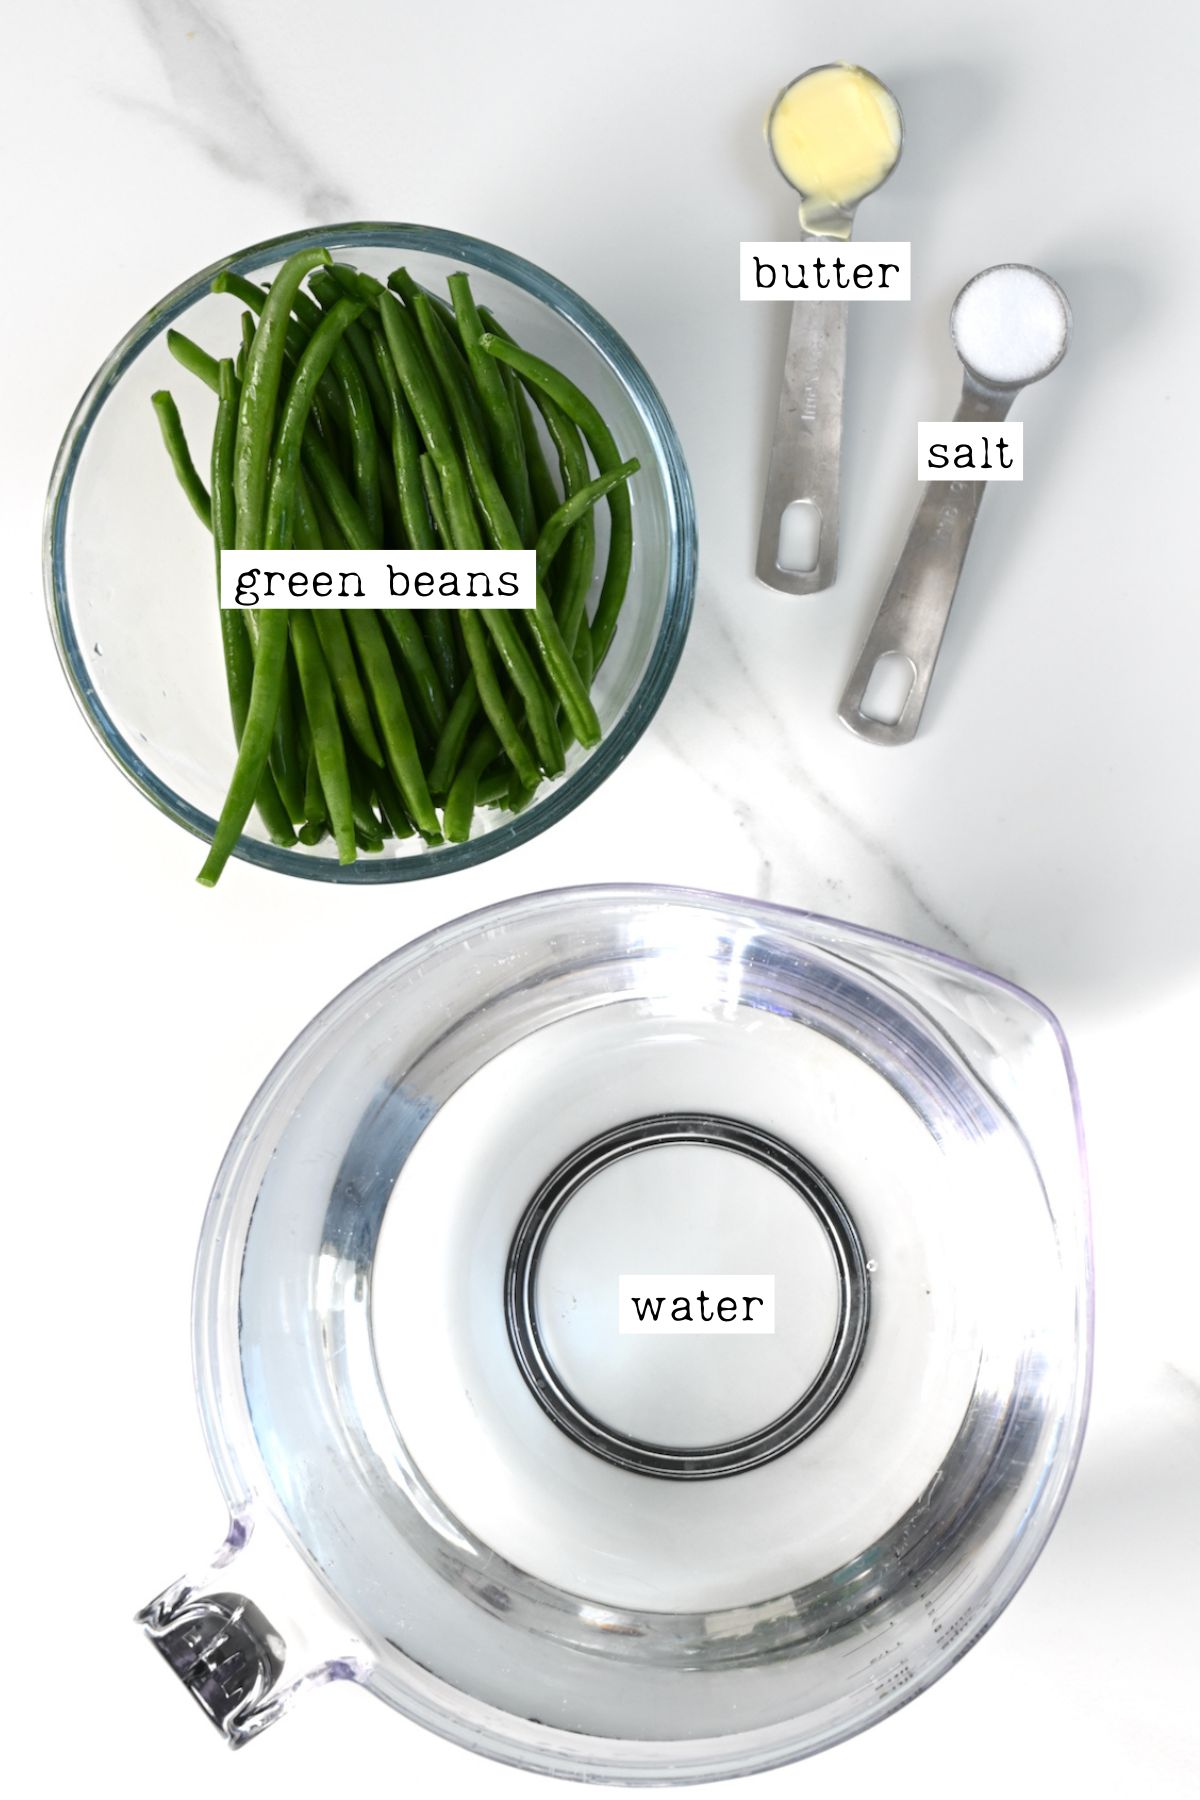 Ingredients for boiling green beans